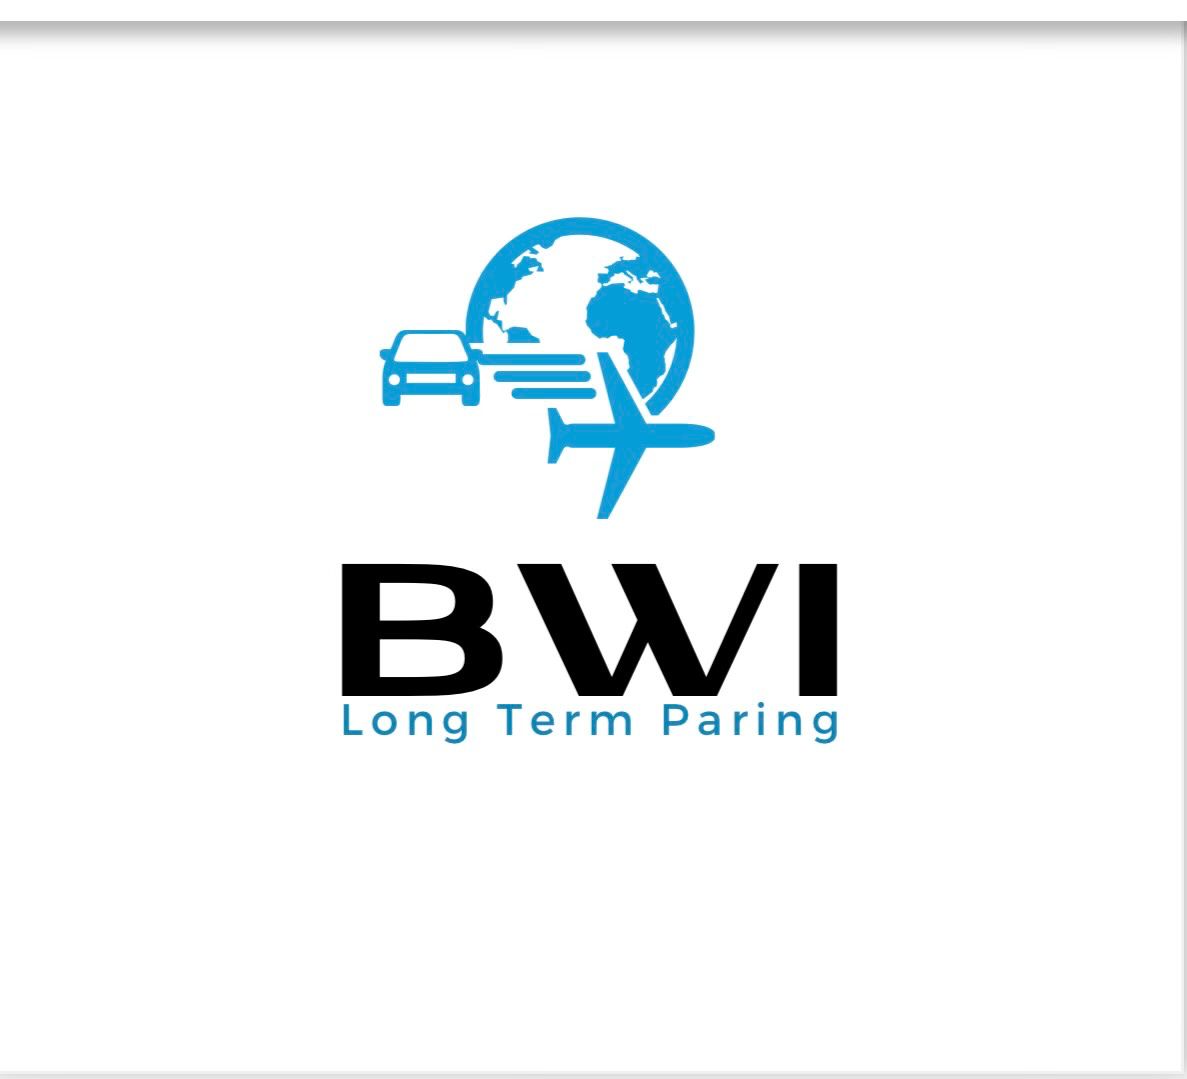 BWI Long Term Parking (BWI)